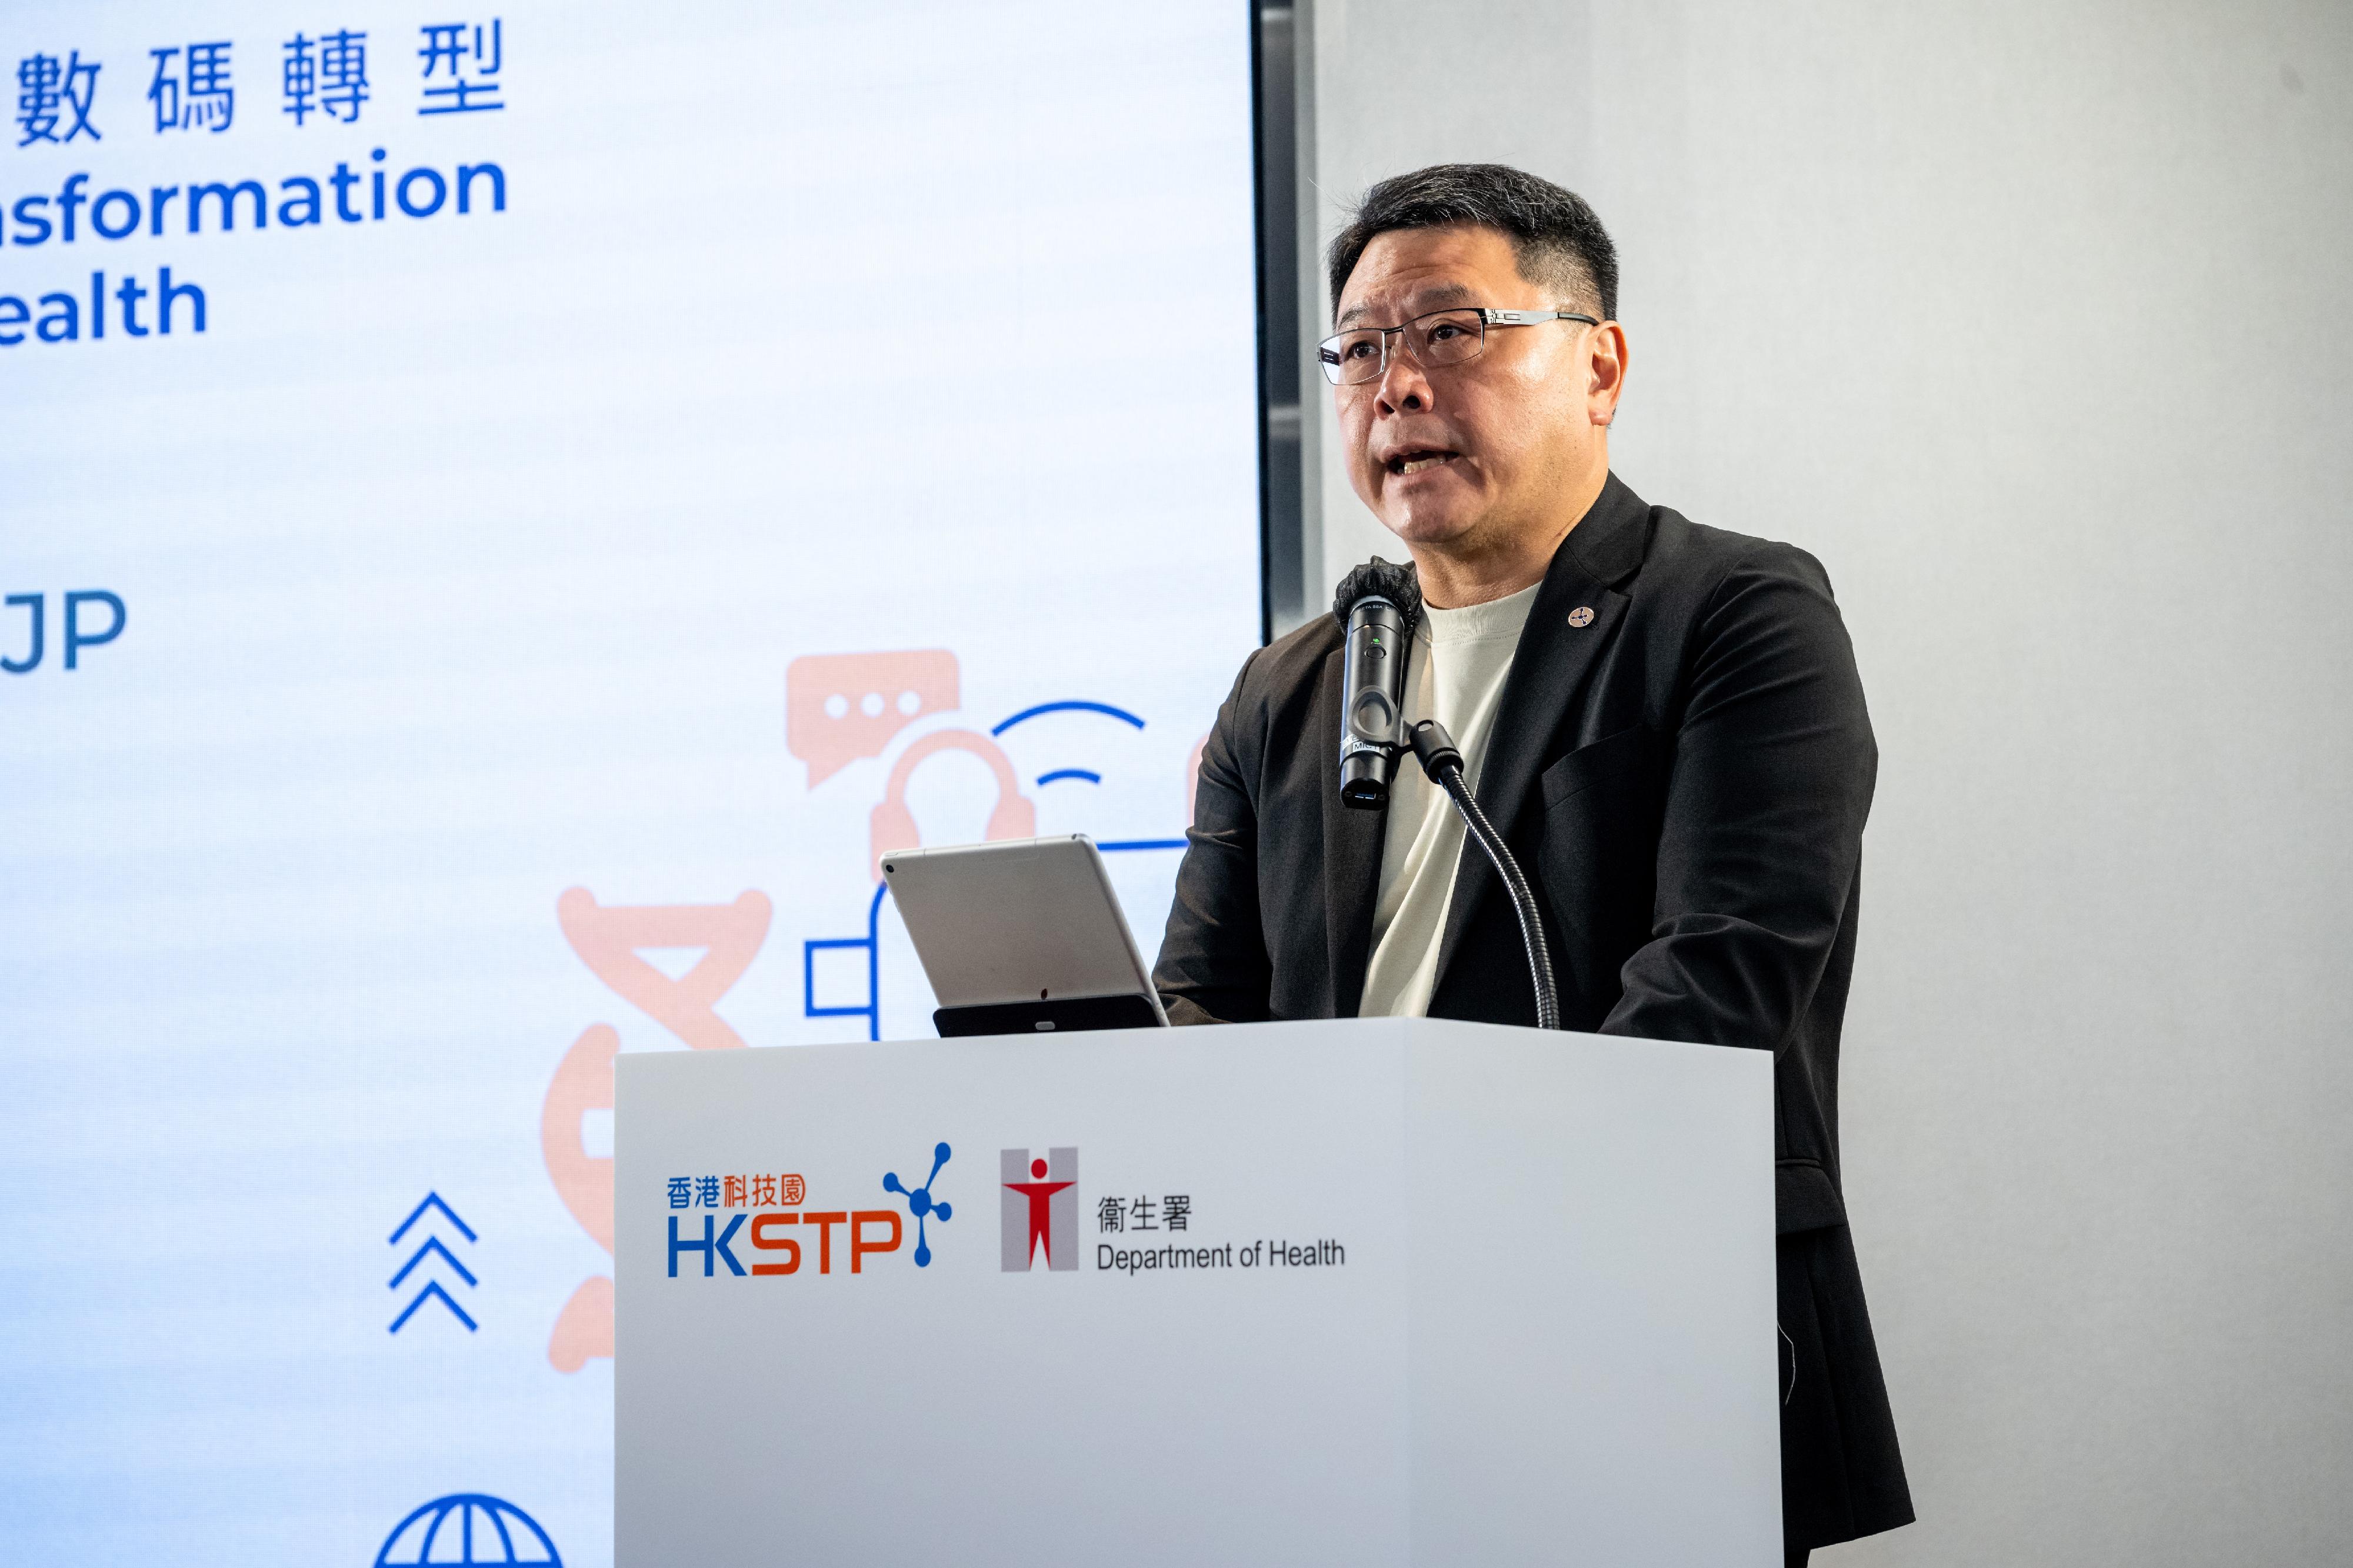 The Department of Health and the Hong Kong Science and Technology Parks Corporation (HKSTP) signed a Memorandum of Understanding today (August 18) which aims at leveraging the latest innovation and technology to expedite digitalisation for public health functions while fostering an innovation-driven culture in the healthcare sector. Photo shows the Chairman of the HKSTP, Dr Sunny Chai, delivering a speech at the signing ceremony.